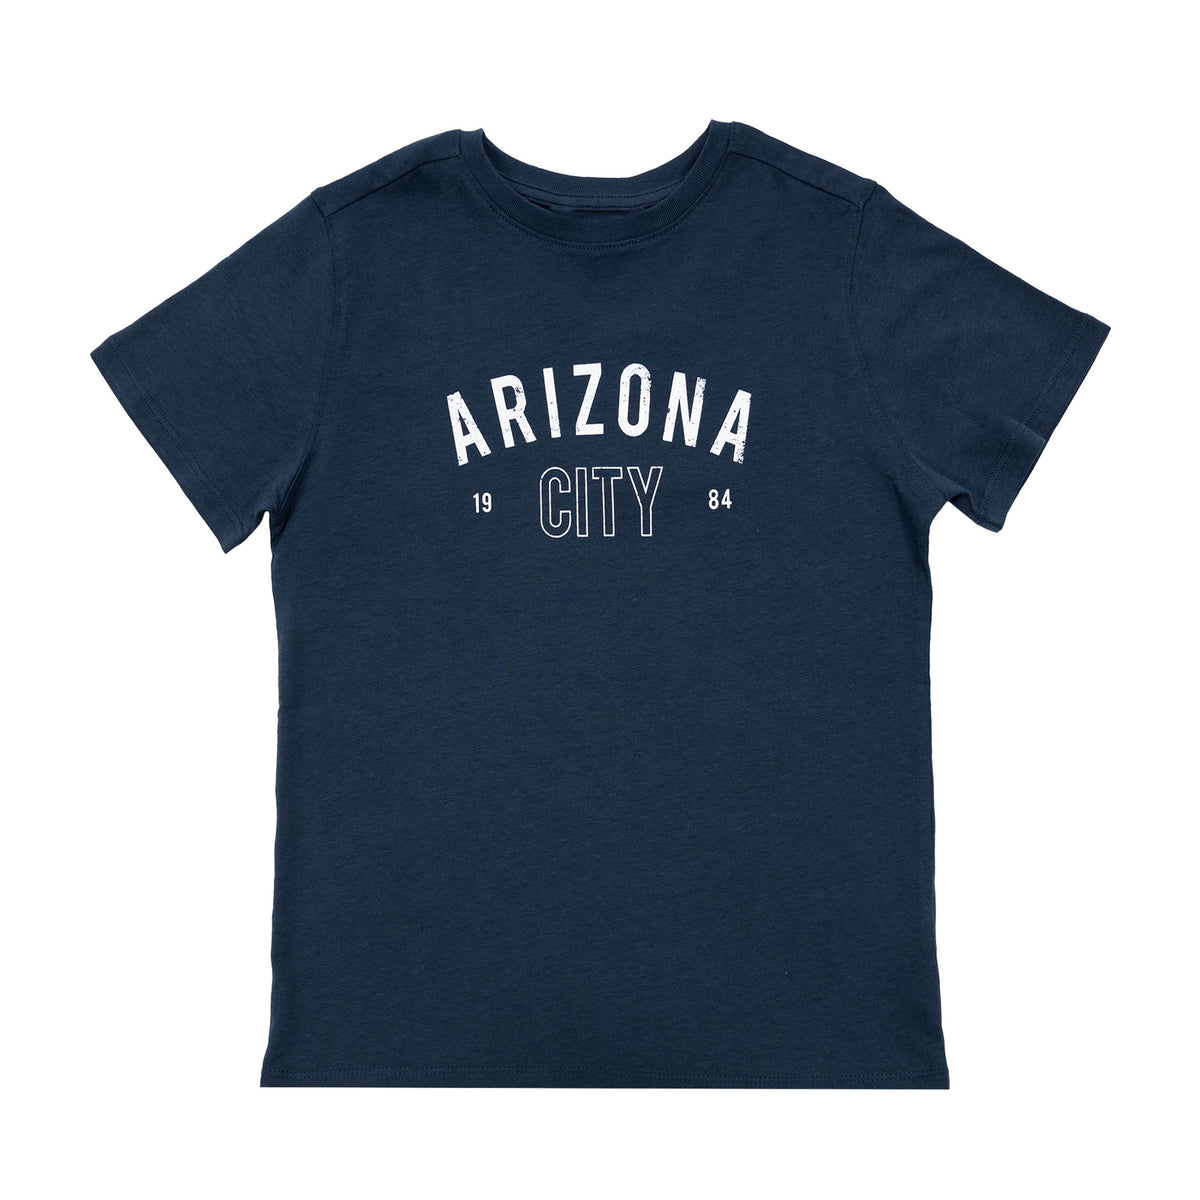 Boys Cotton T-Shirt: Essential Comfort and Style in One